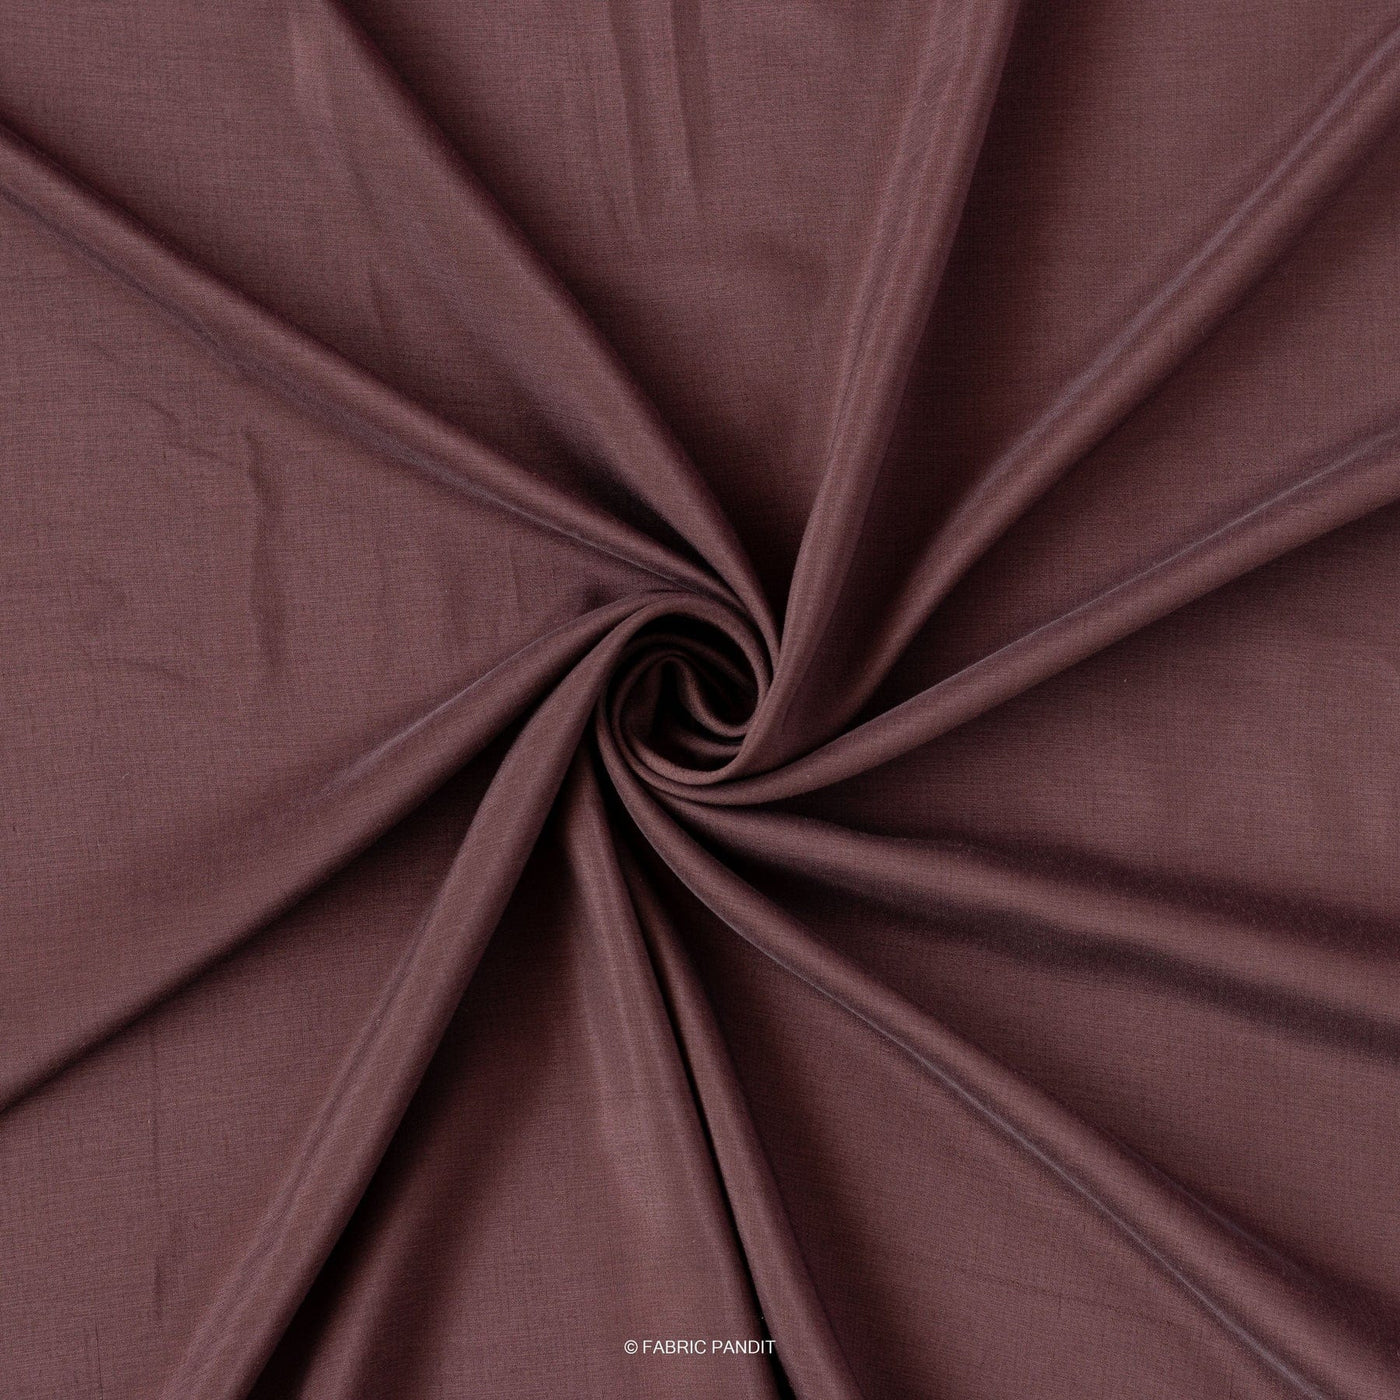 Fabric Pandit Fabric Rose Brown Plain Soft Poly Muslin Fabric (Width 44 Inches)